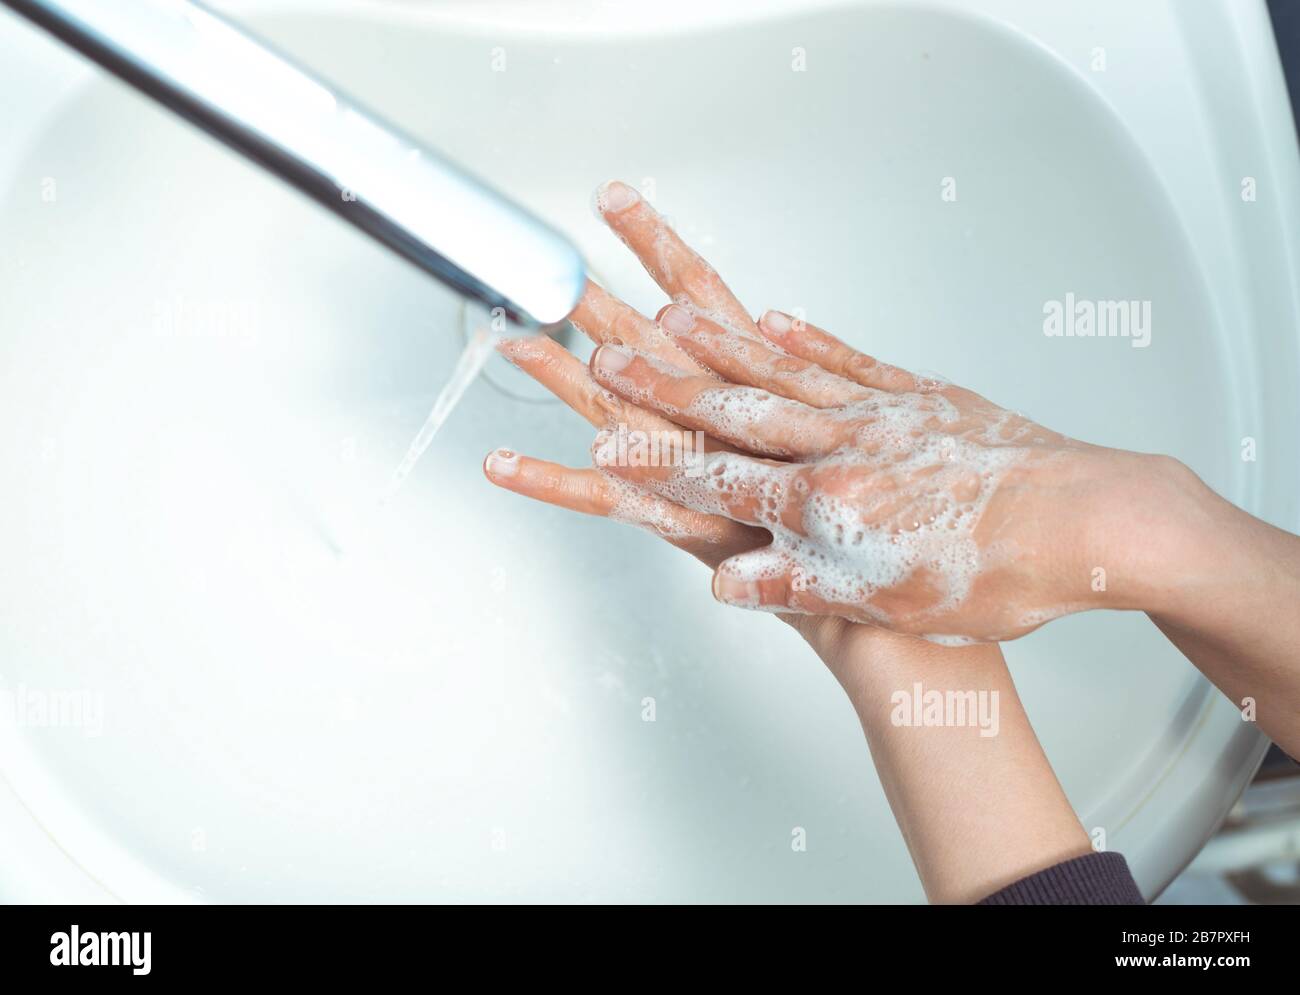 Hand washing with soap. Hygiene concept. Stock Photo